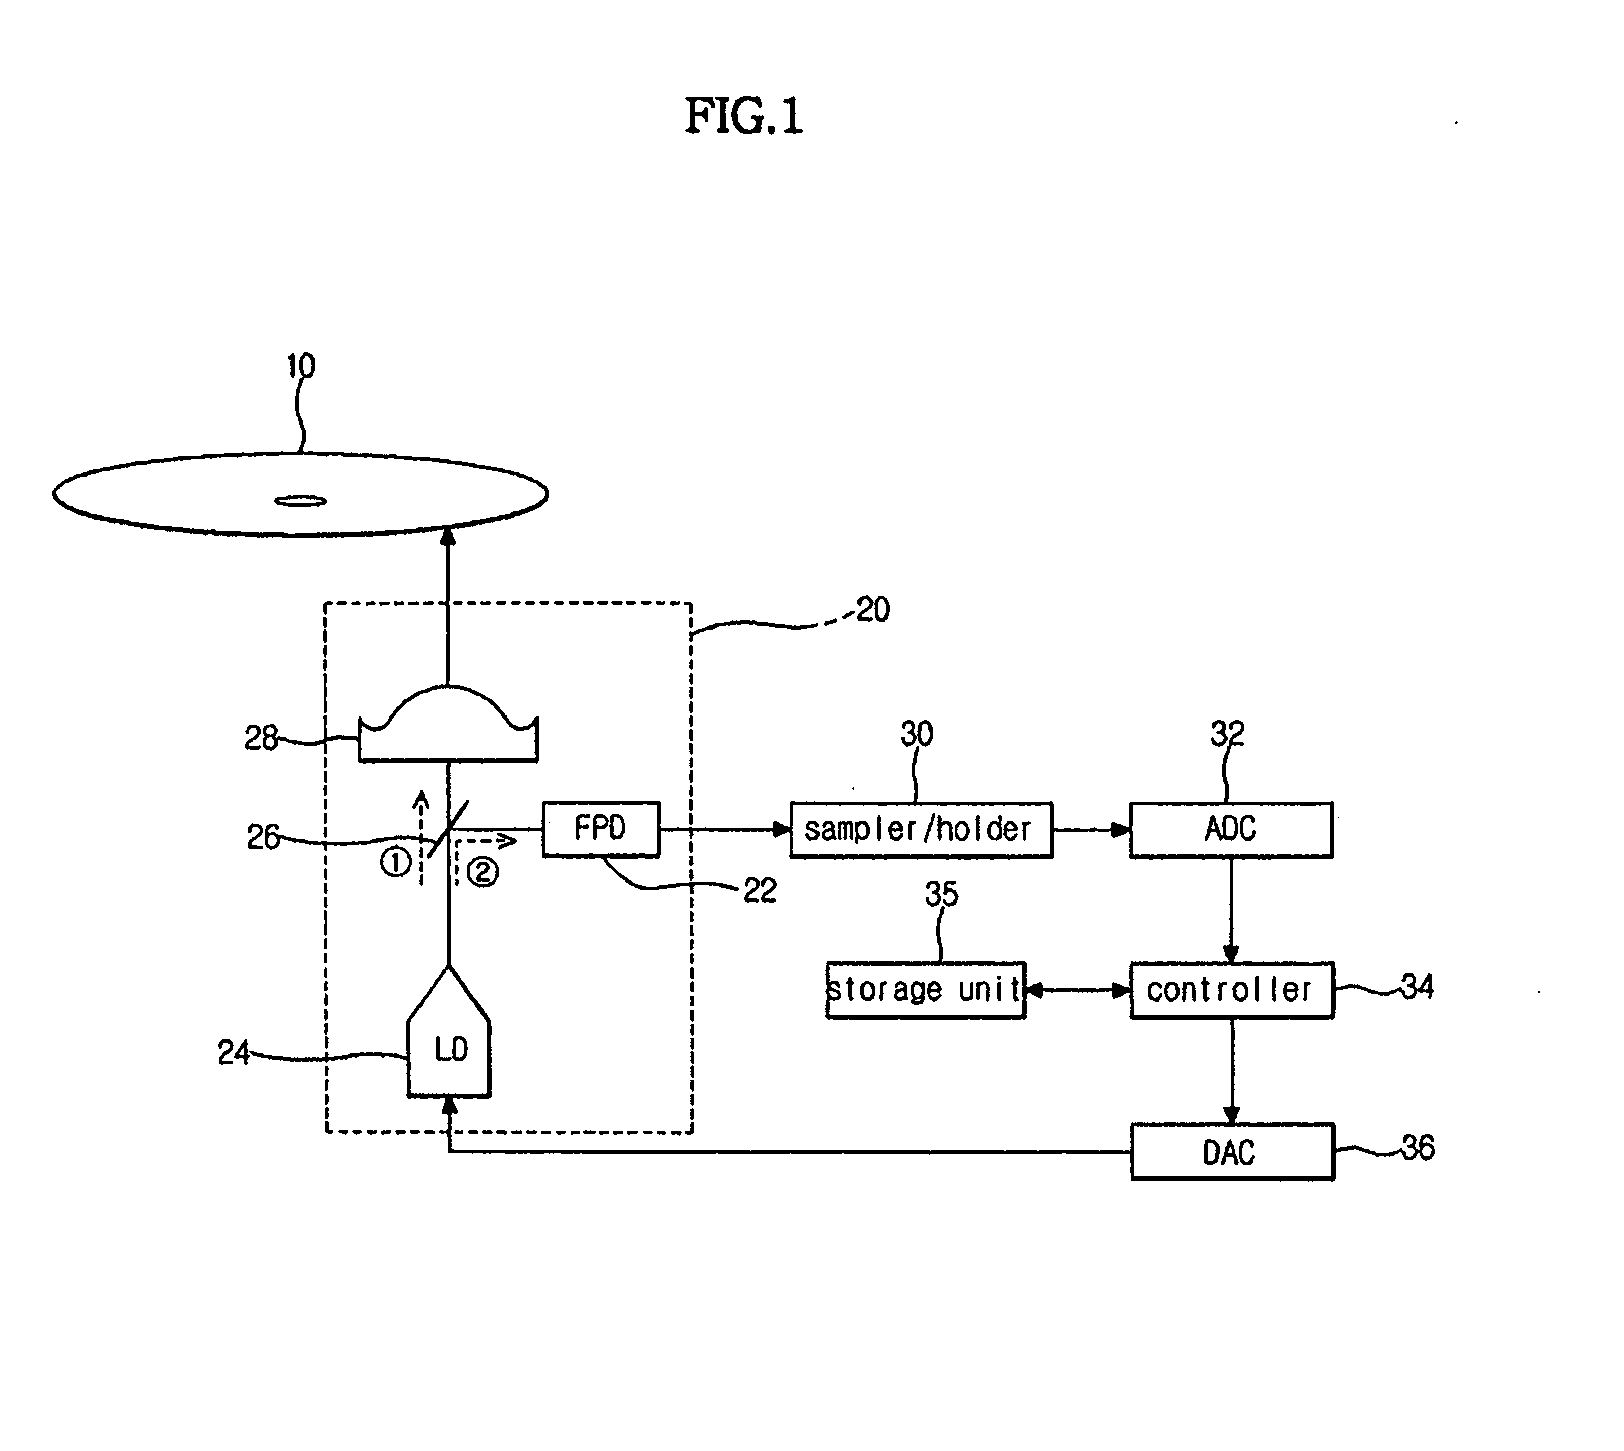 Optical disc apparatus and method for performing optical power study thereof